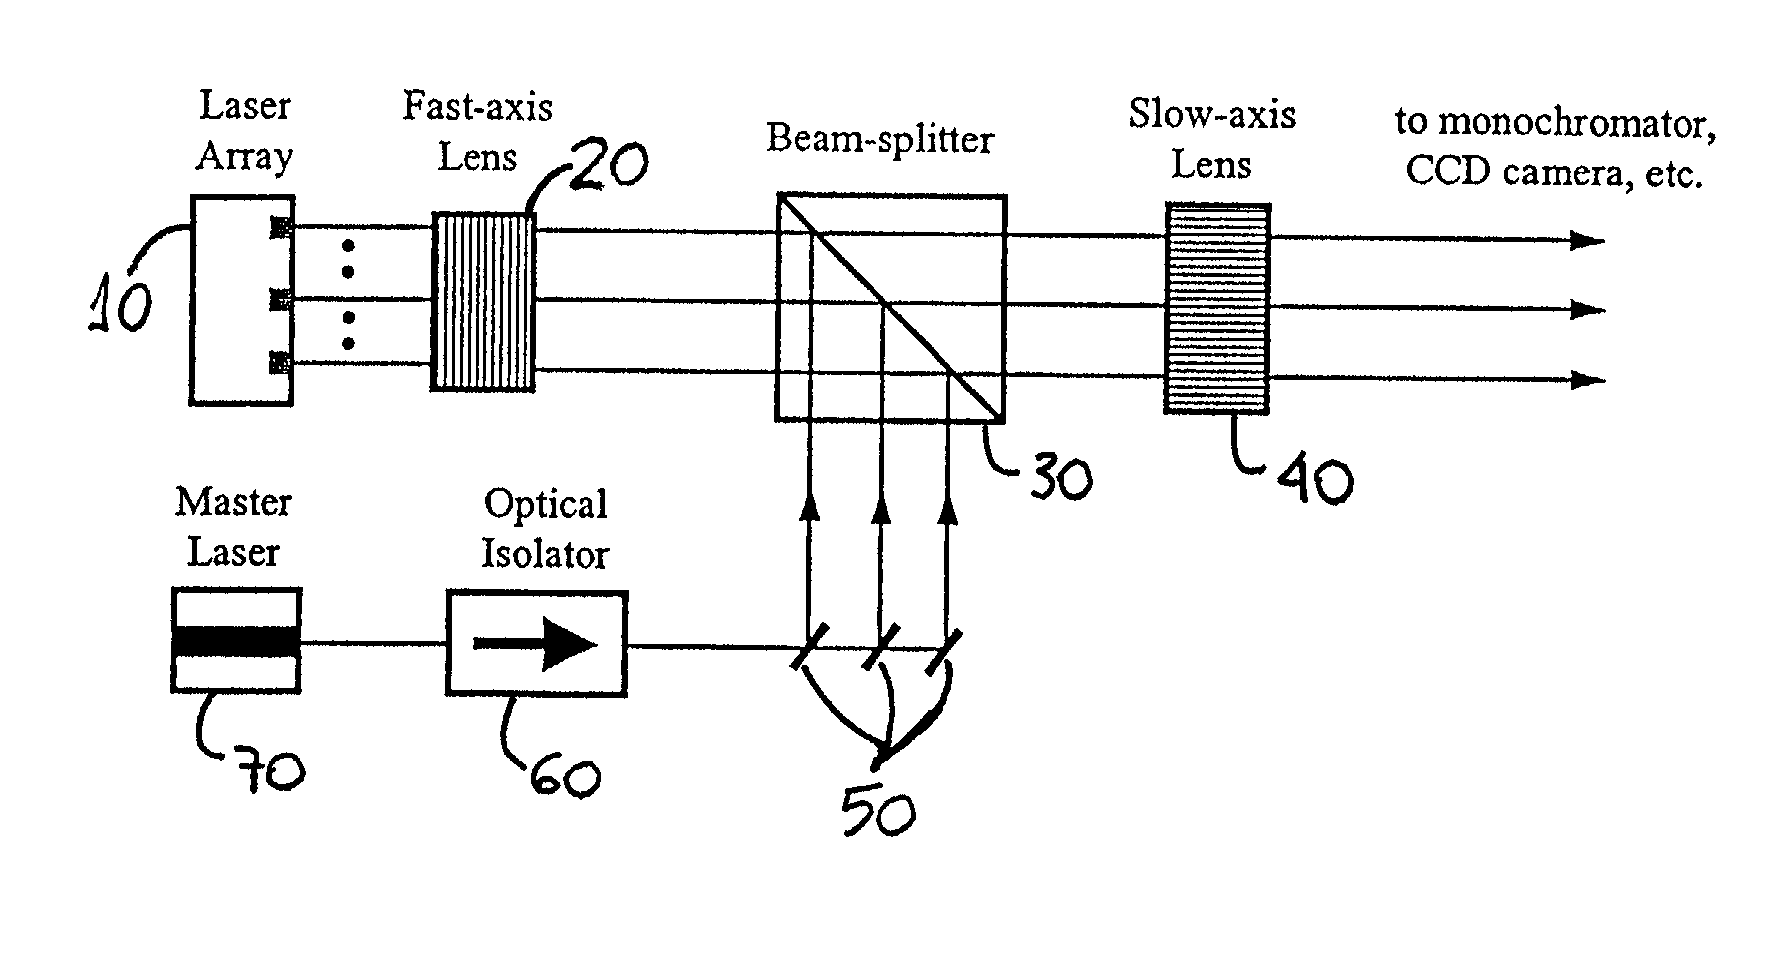 Master laser injection of board area lasers